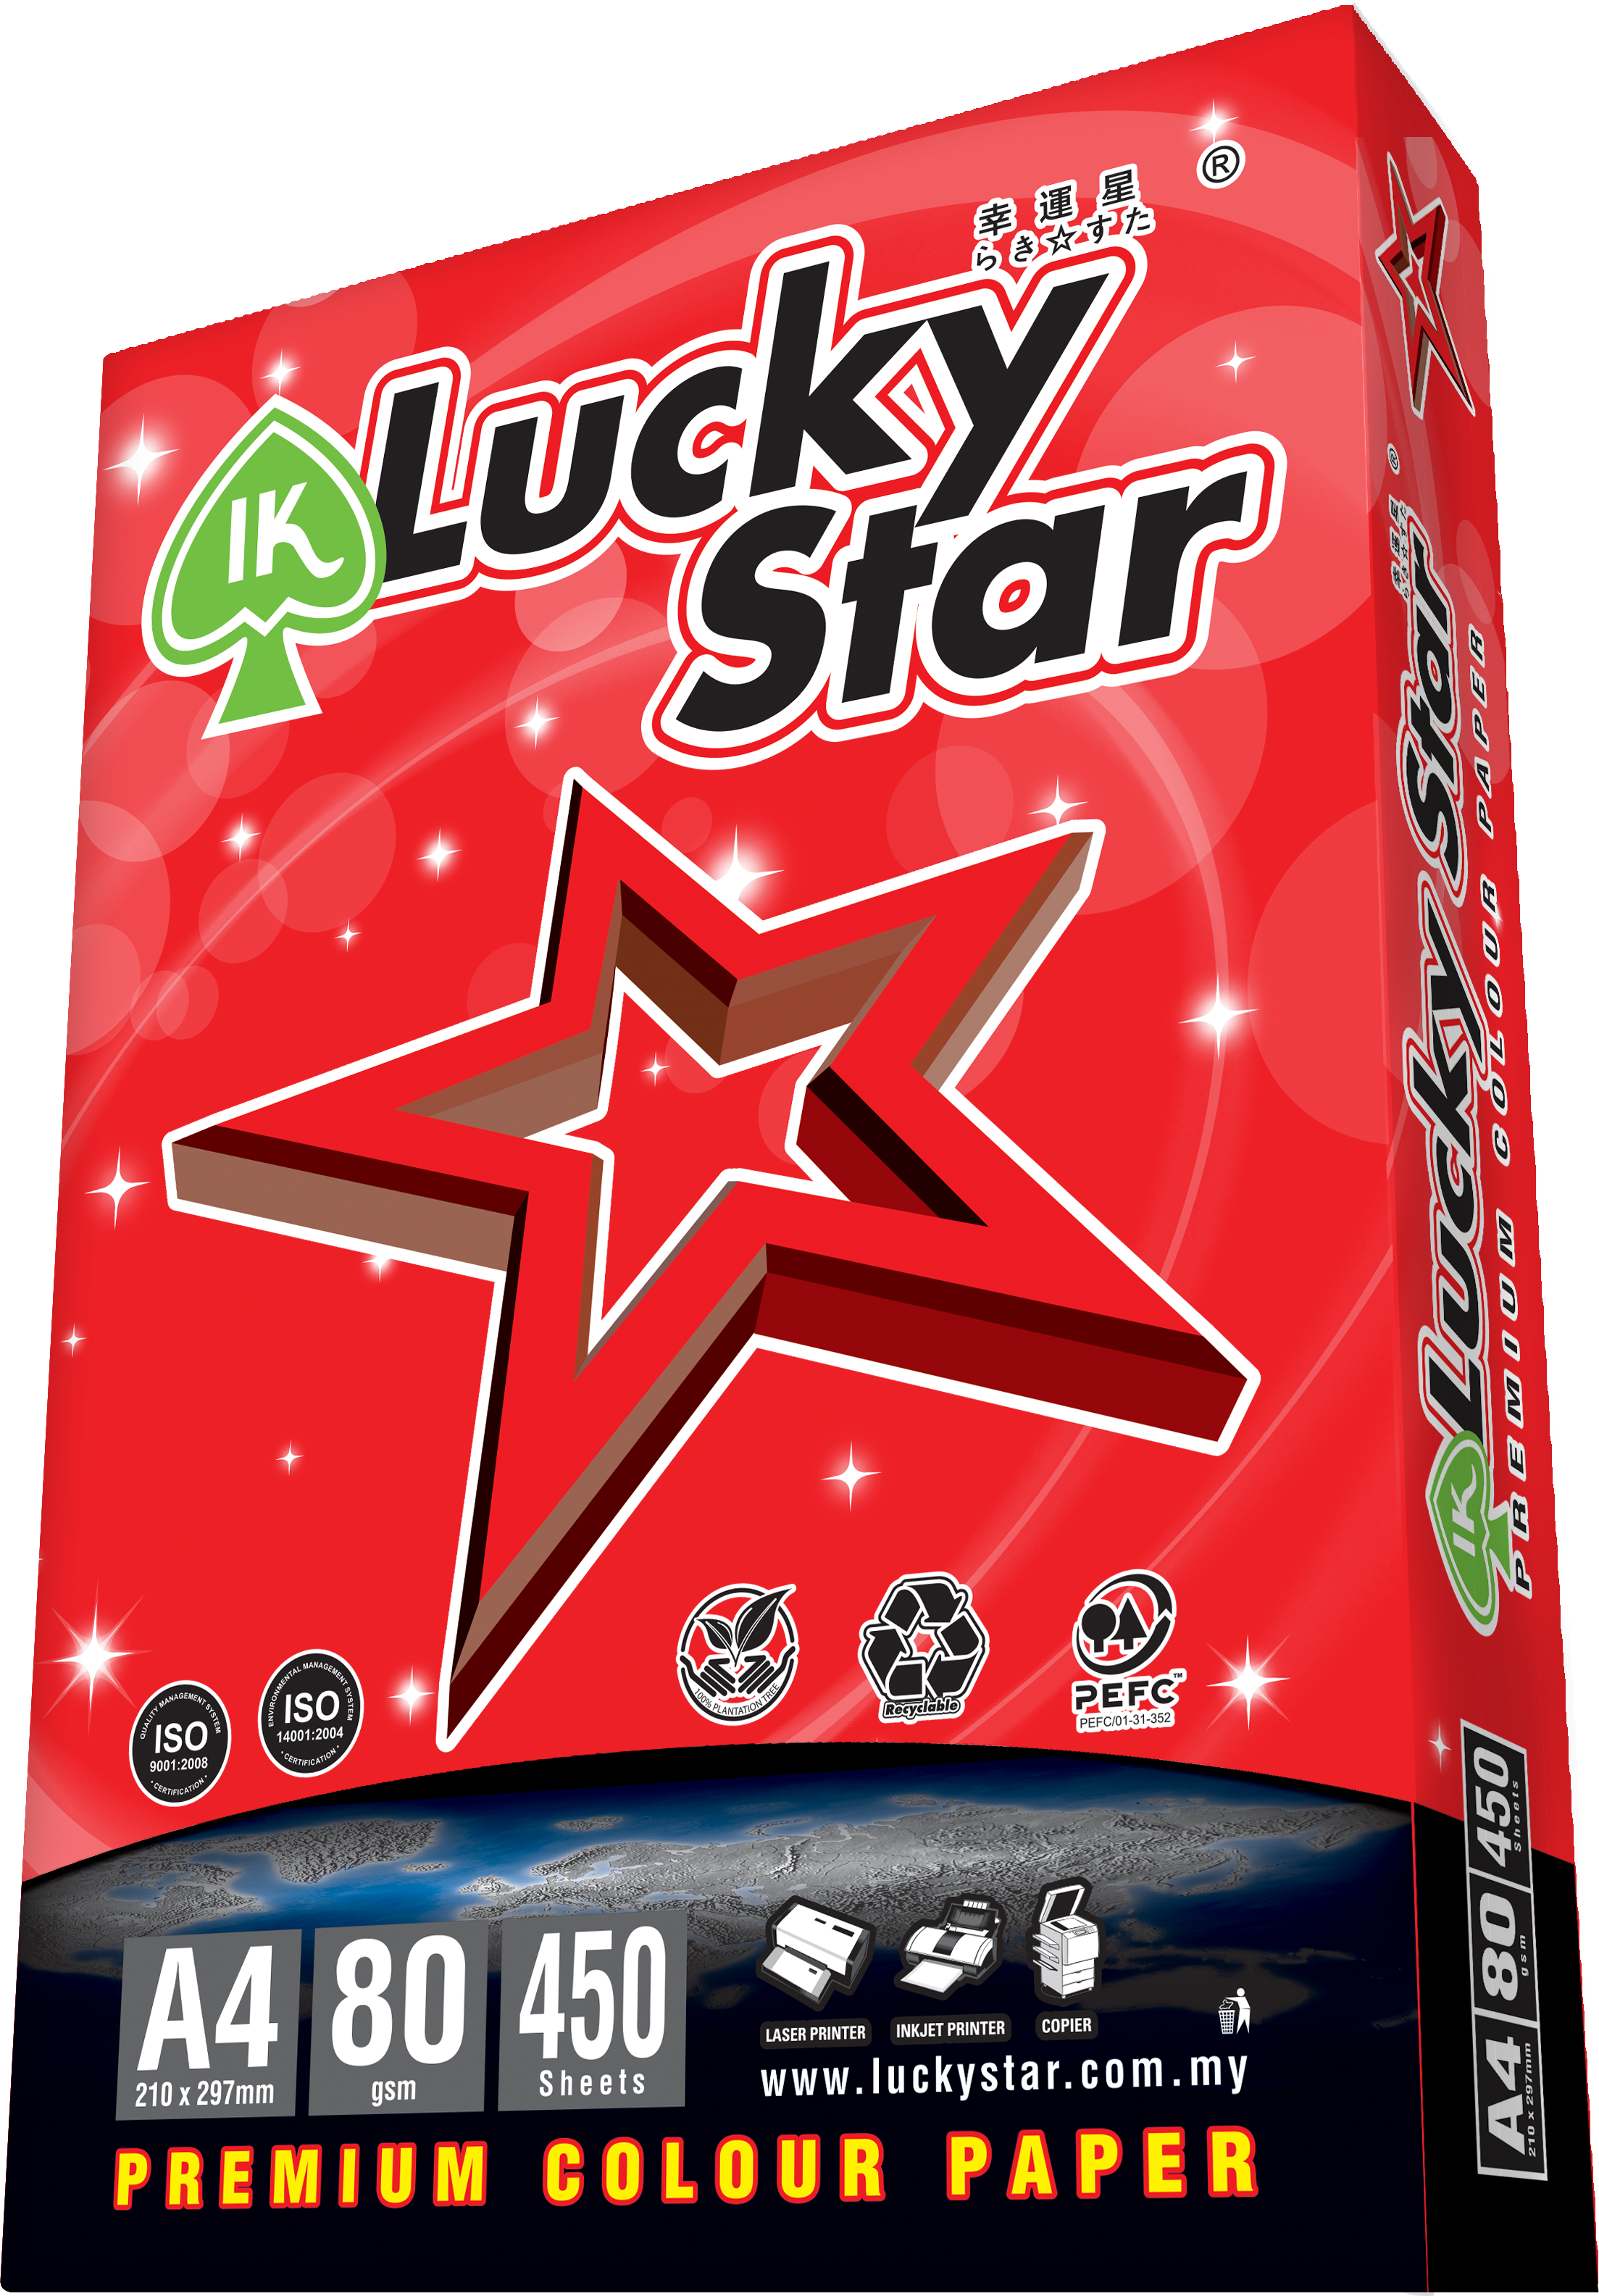 A4 LUCKY STAR COLOR PAPER DARK